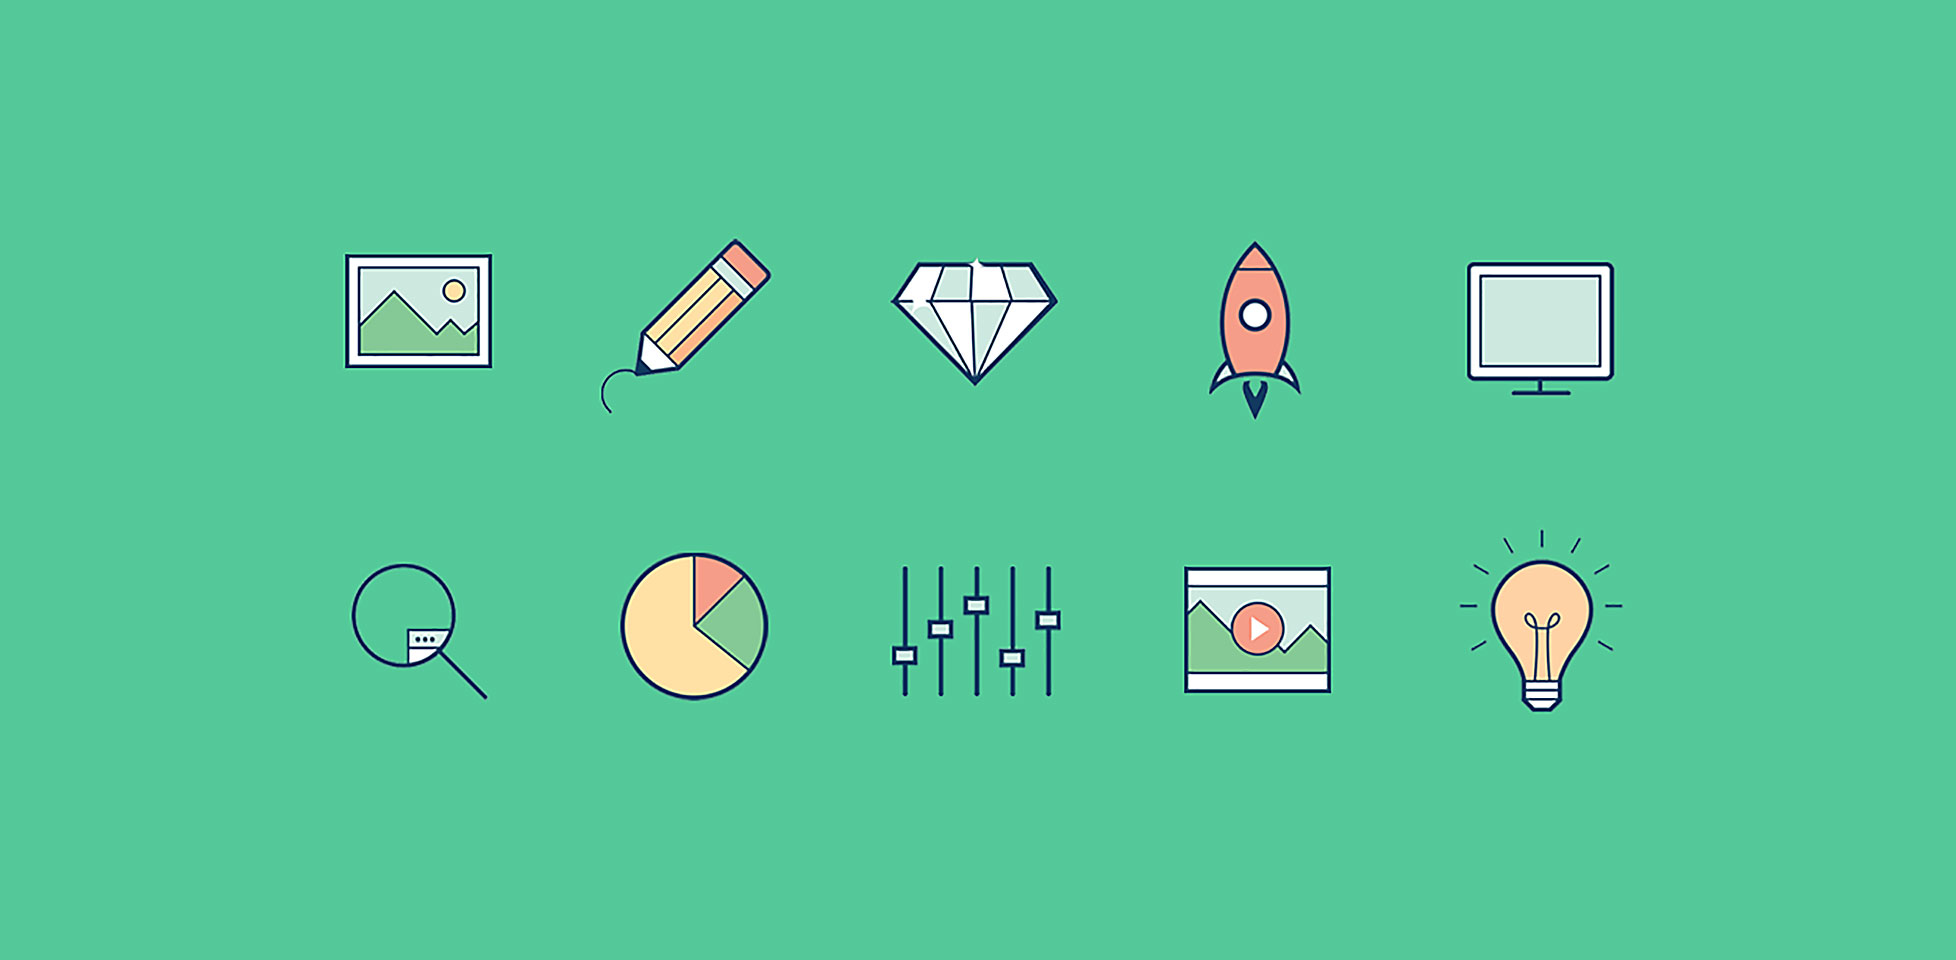 Download Free Download: 20 Animated Icons From Animaticons ...